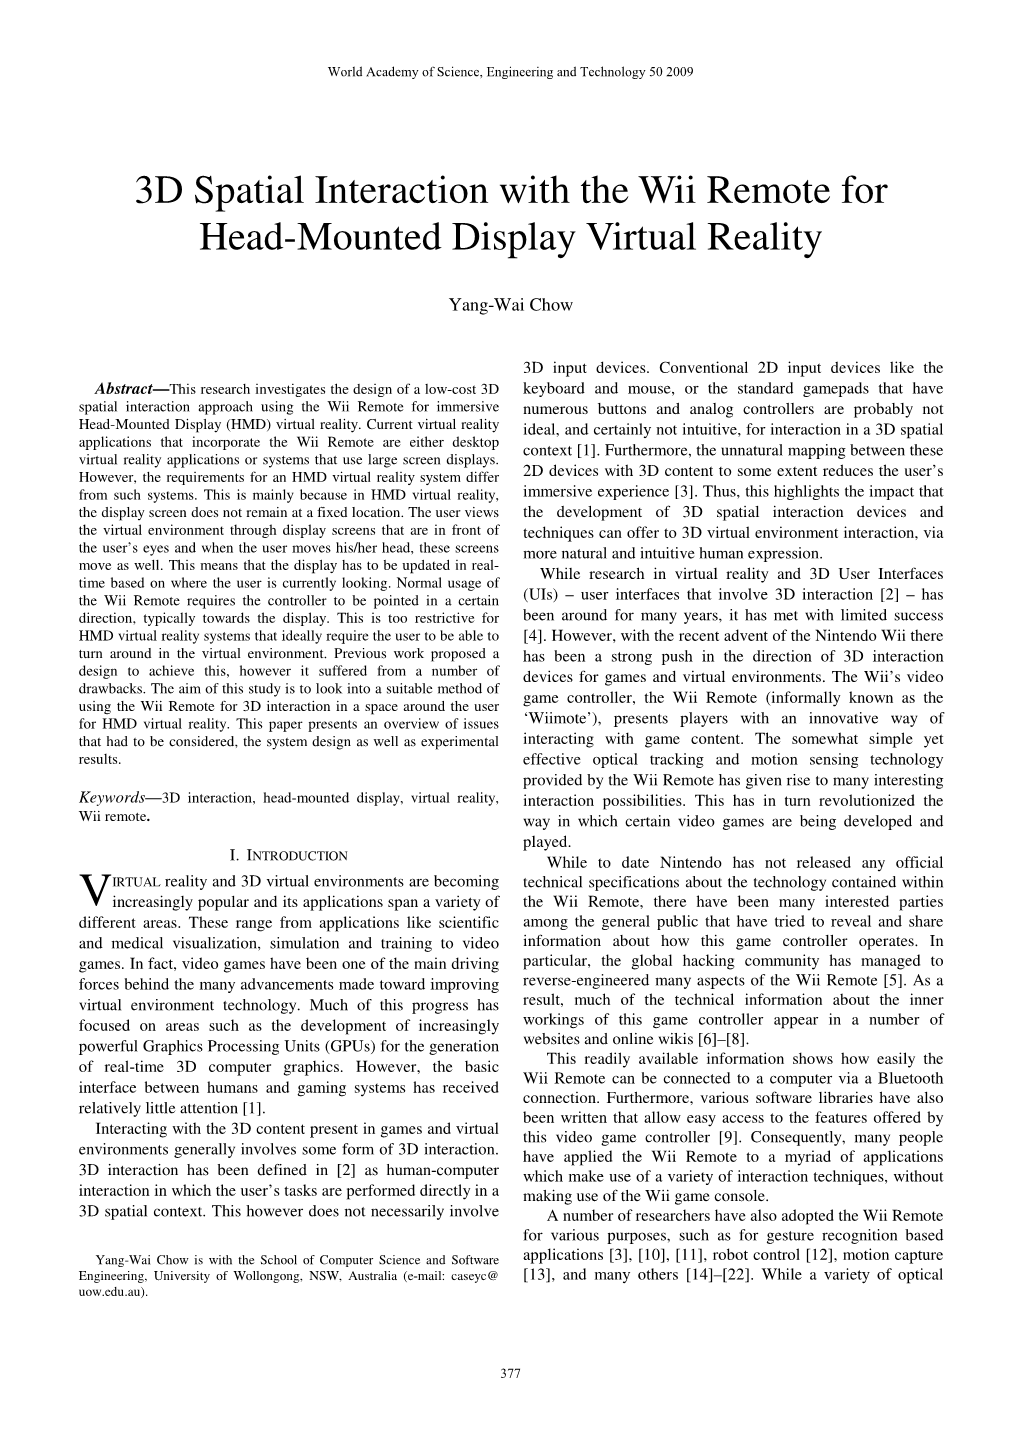 3D Spatial Interaction with the Wii Remote for Head-Mounted Display Virtual Reality